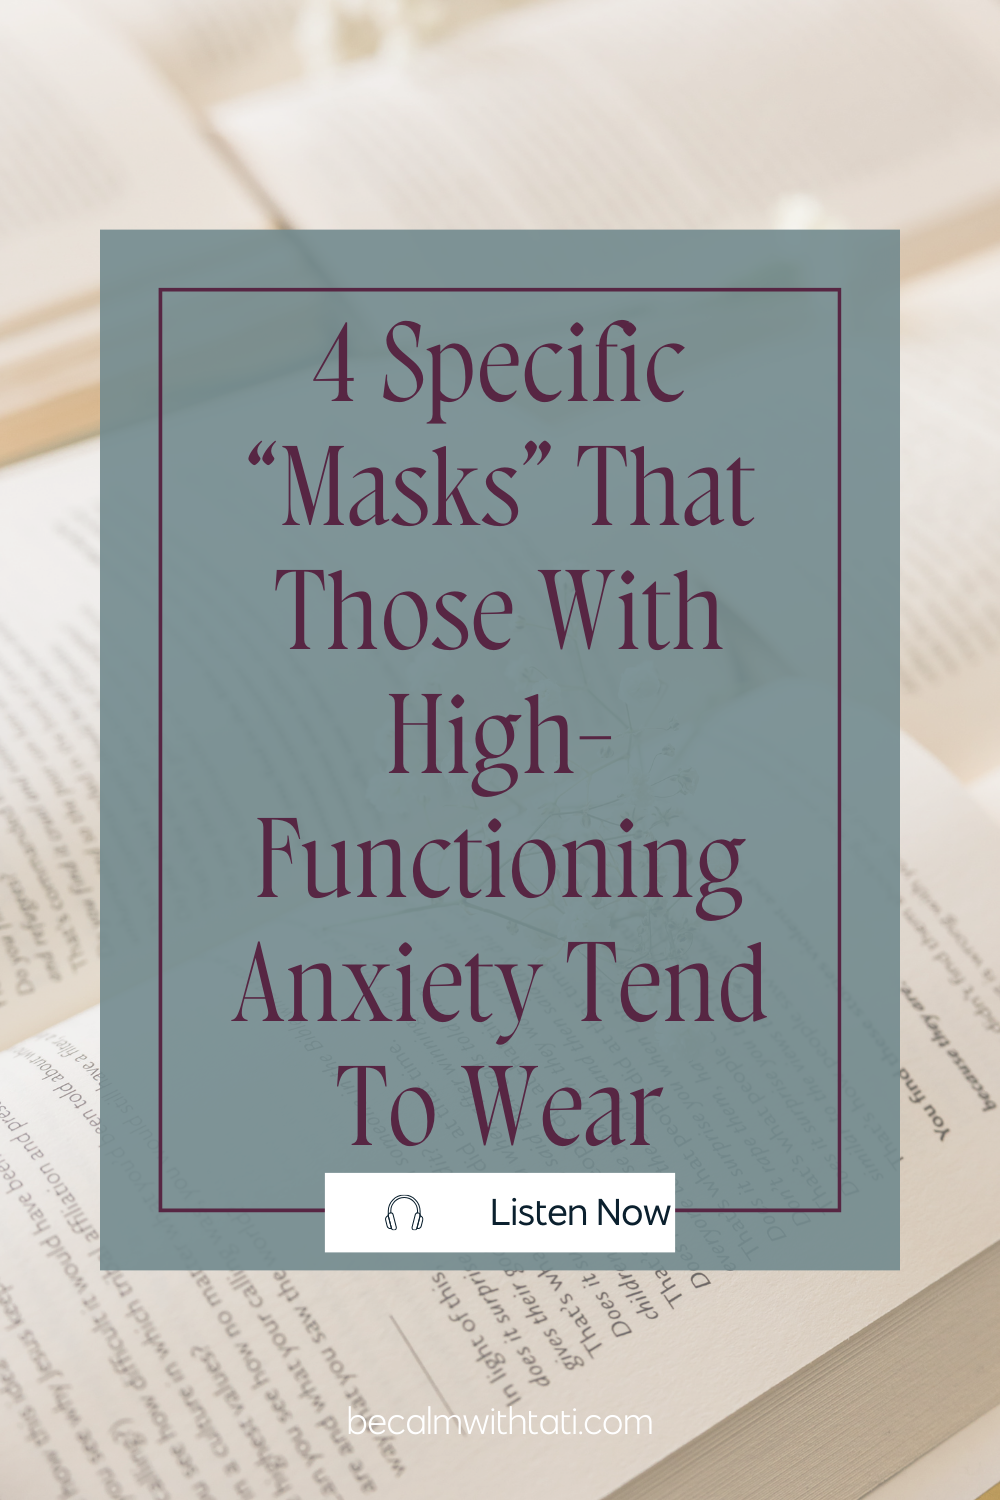 The Mask of High-Functioning Anxiety